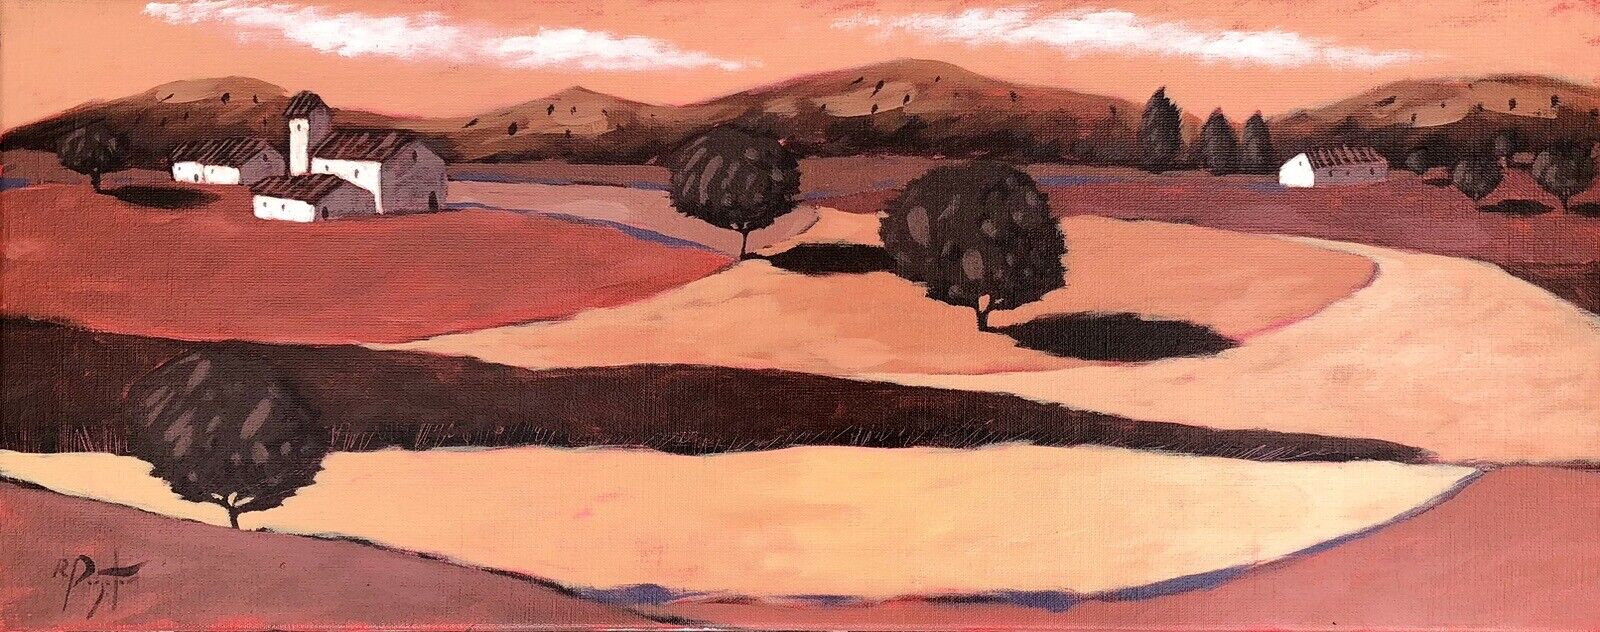 RICHARD PARGETER, CONTINENTAL LANDSCAPE, ACRYLIC ON CANVAS PAINTING